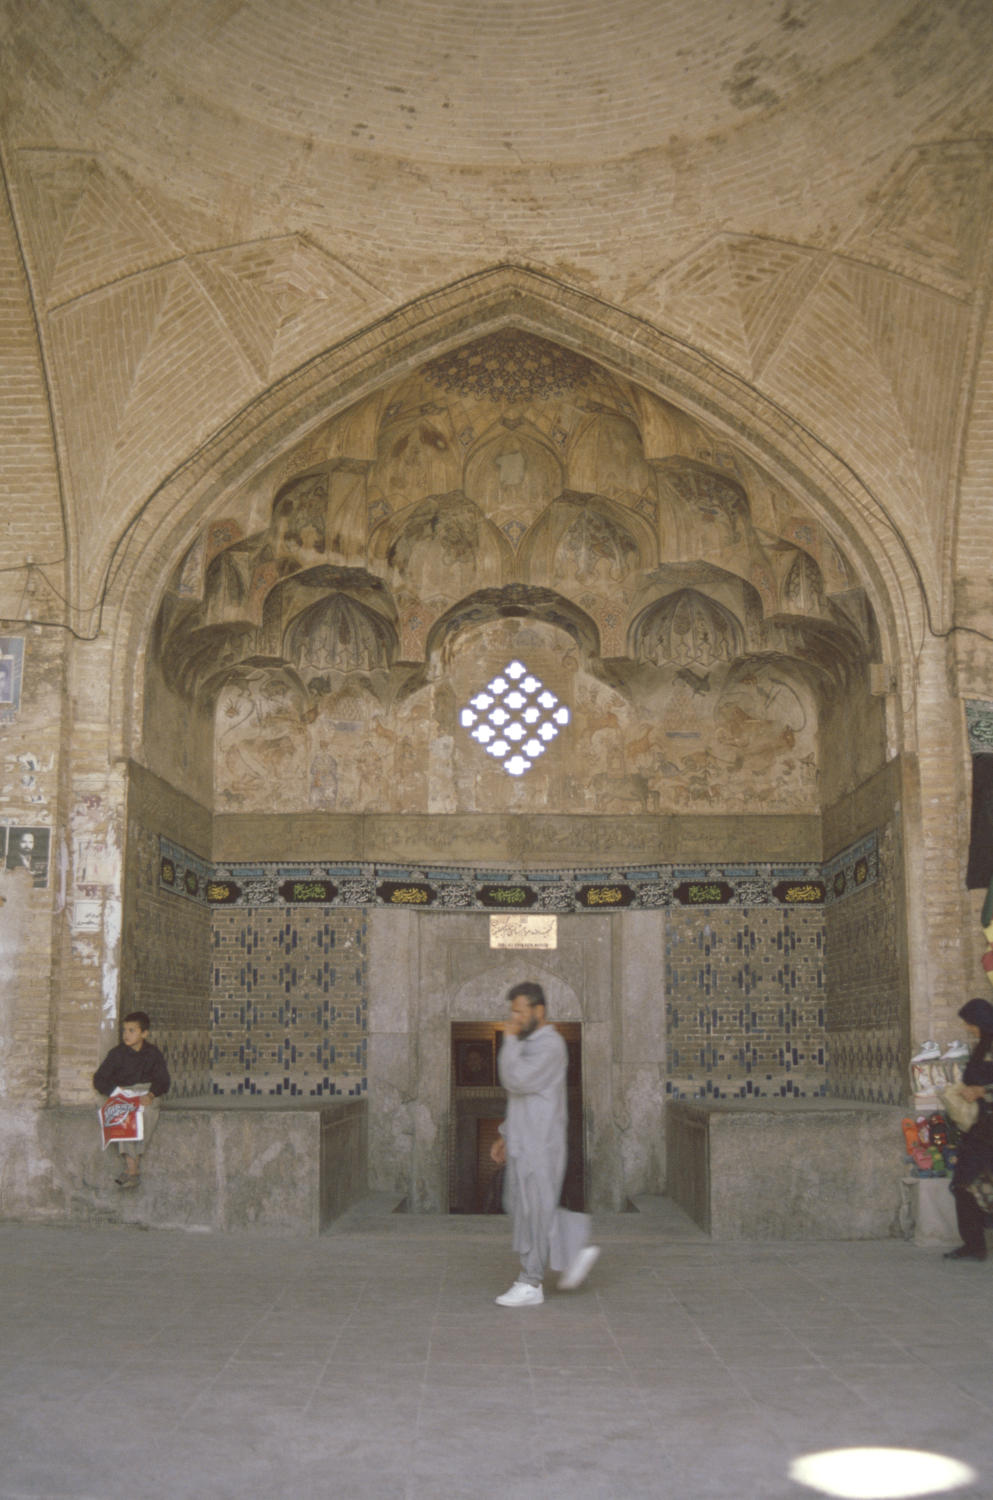 View of the entrance portal, from the bazaar.